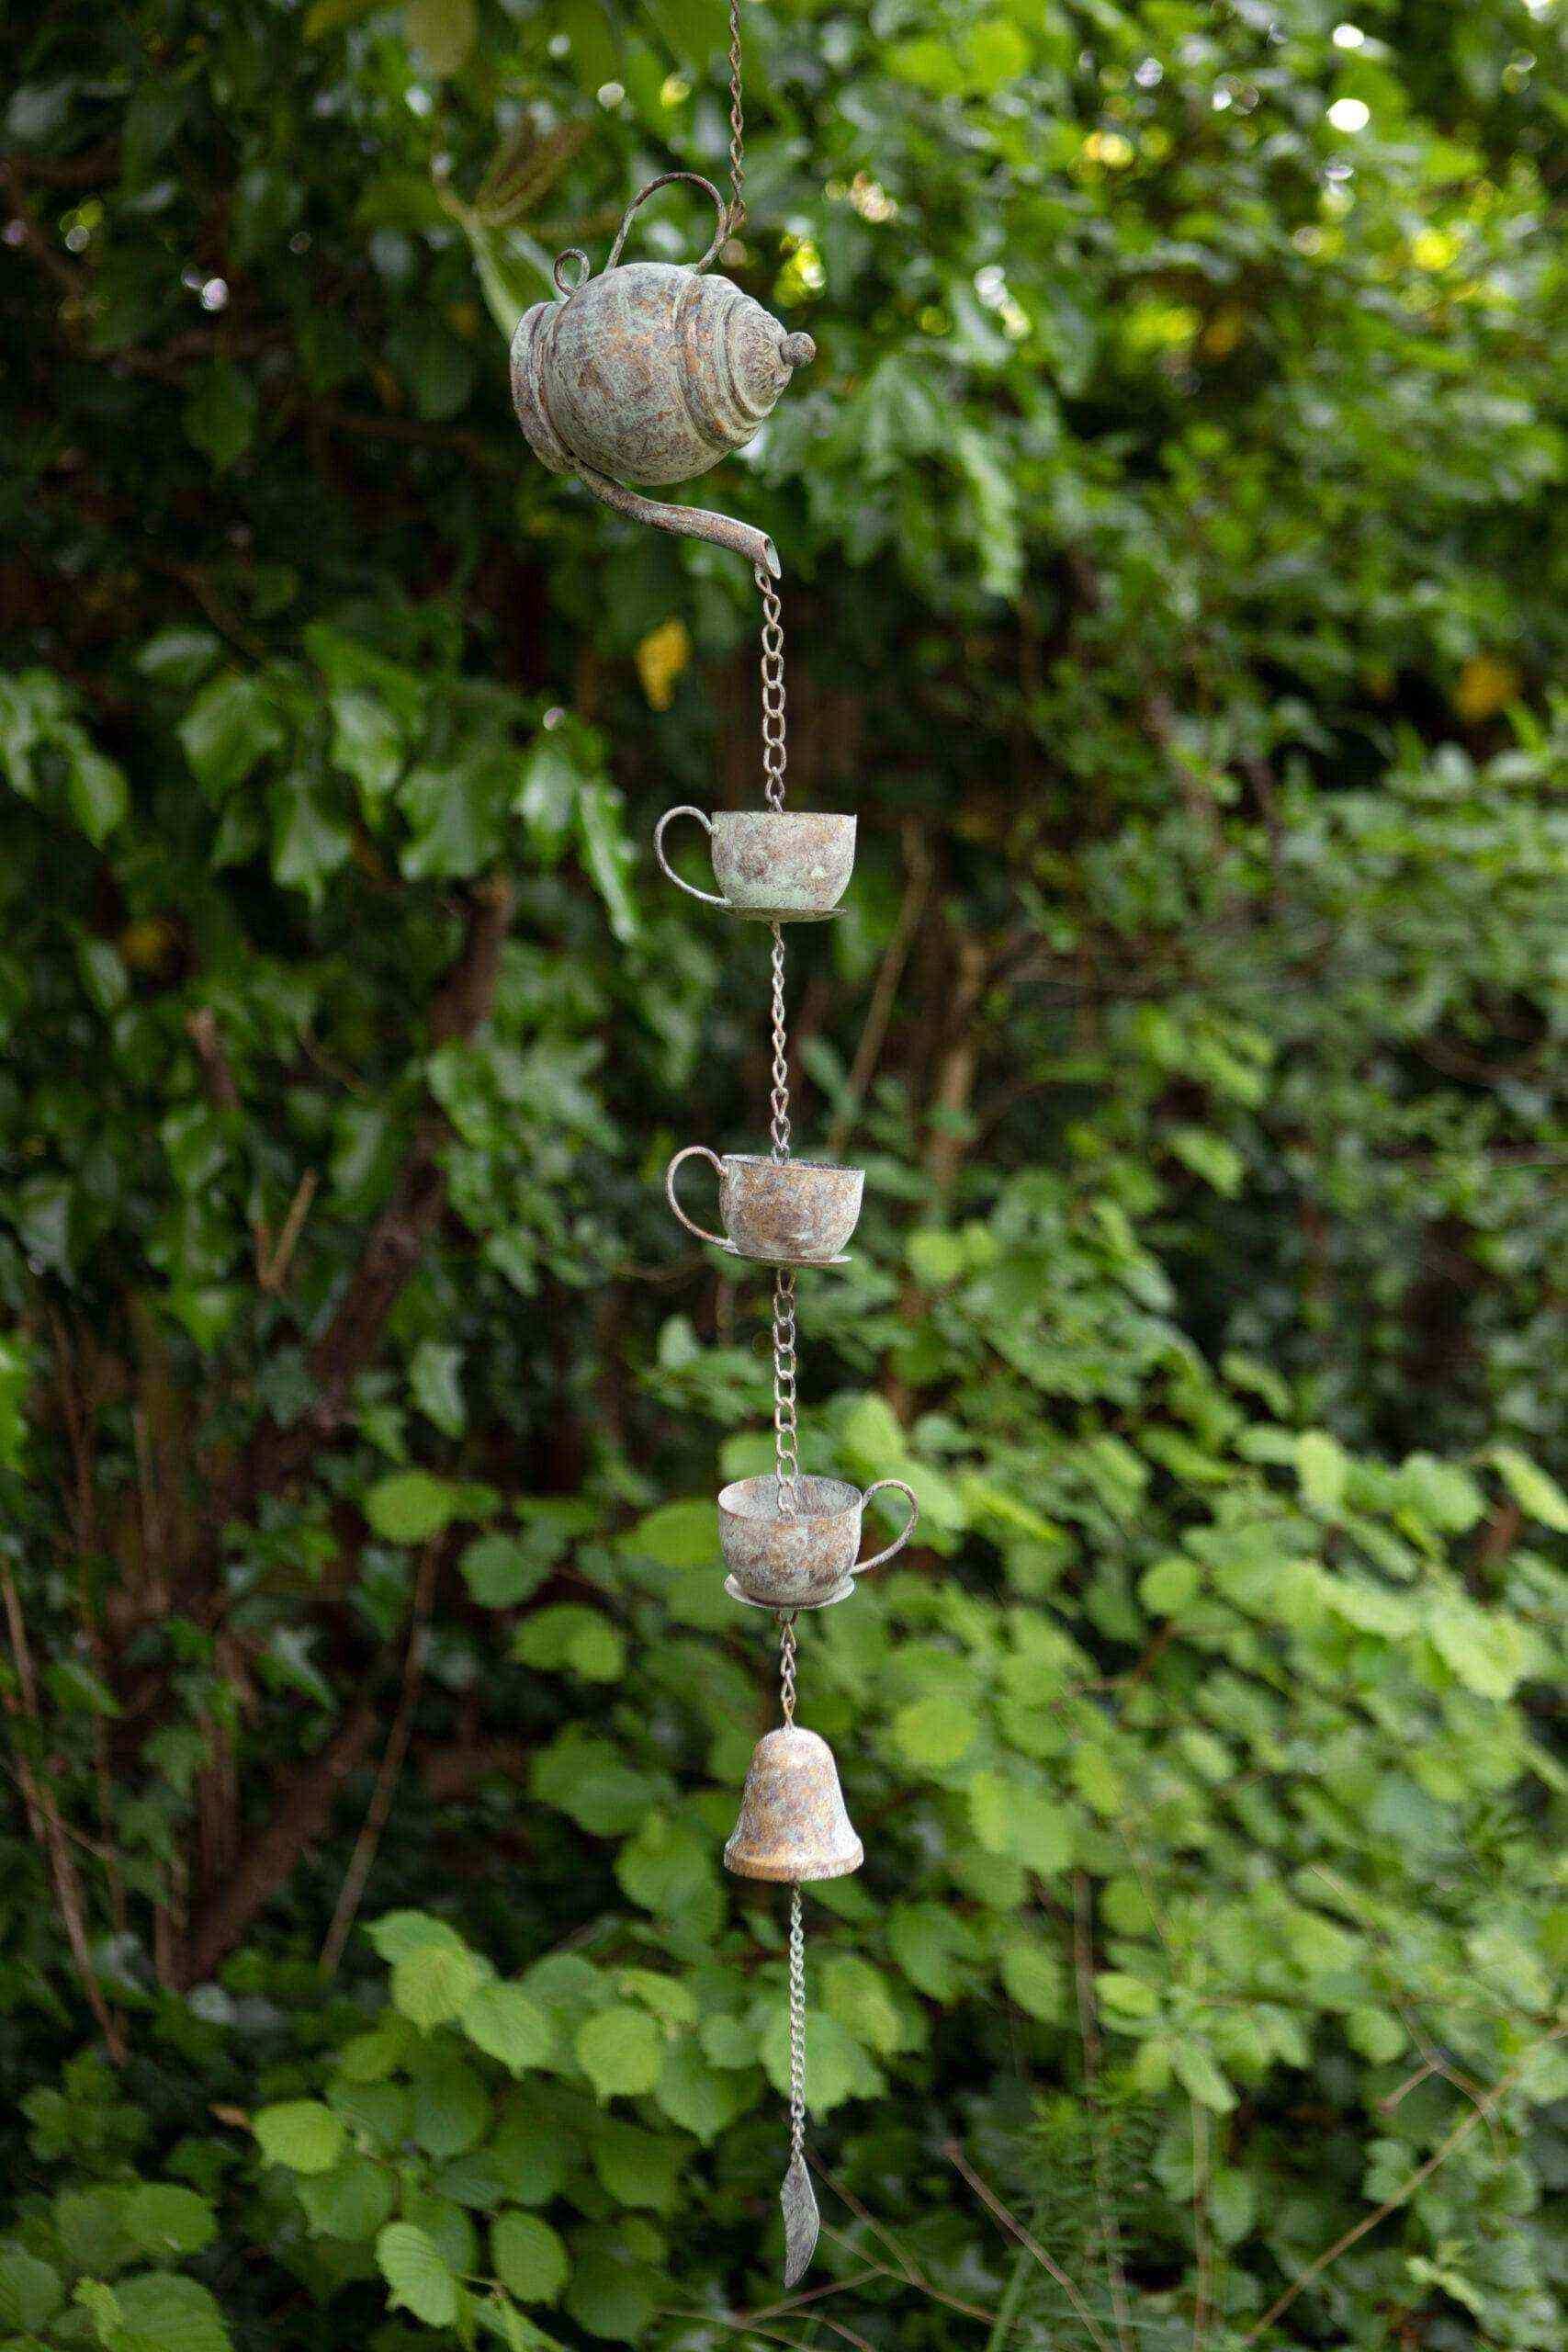 Decorative Hanging Teapot and Cups Rain Chain - The Farthing